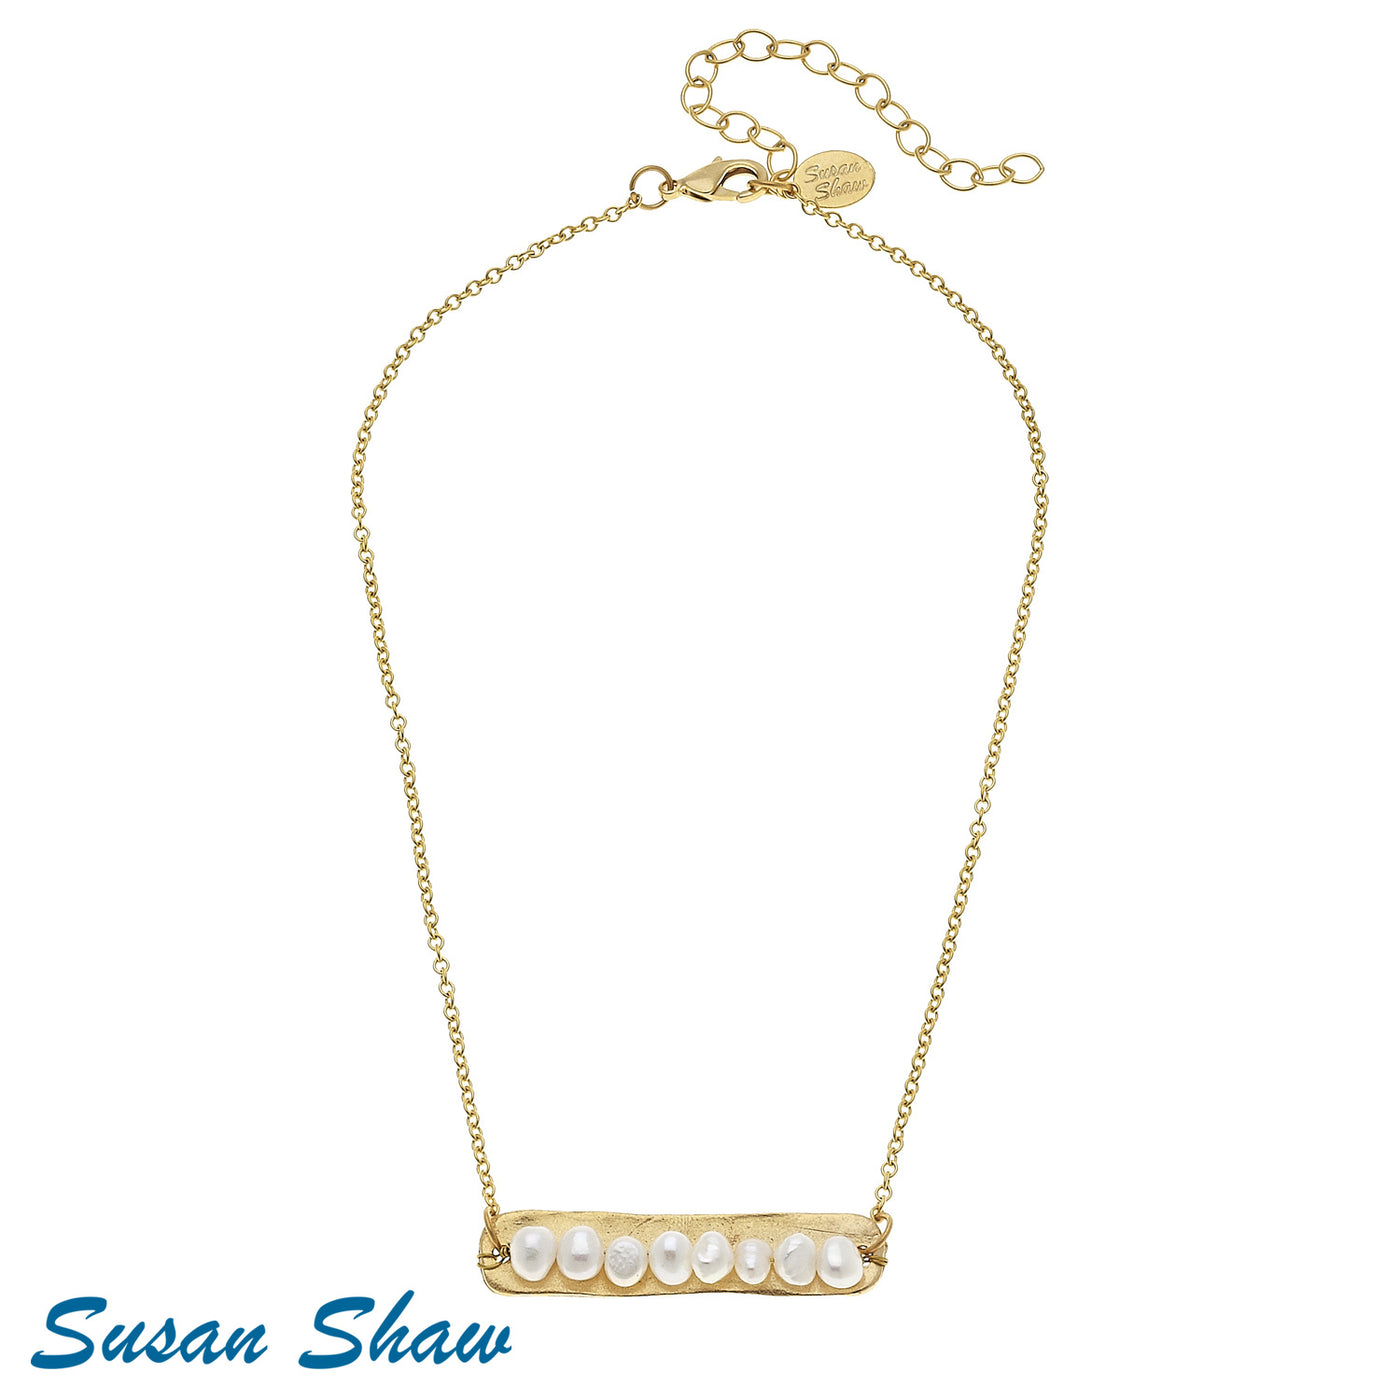 Genuine Freshwater Pearls on Gold Bar Necklace - Susan Shaw